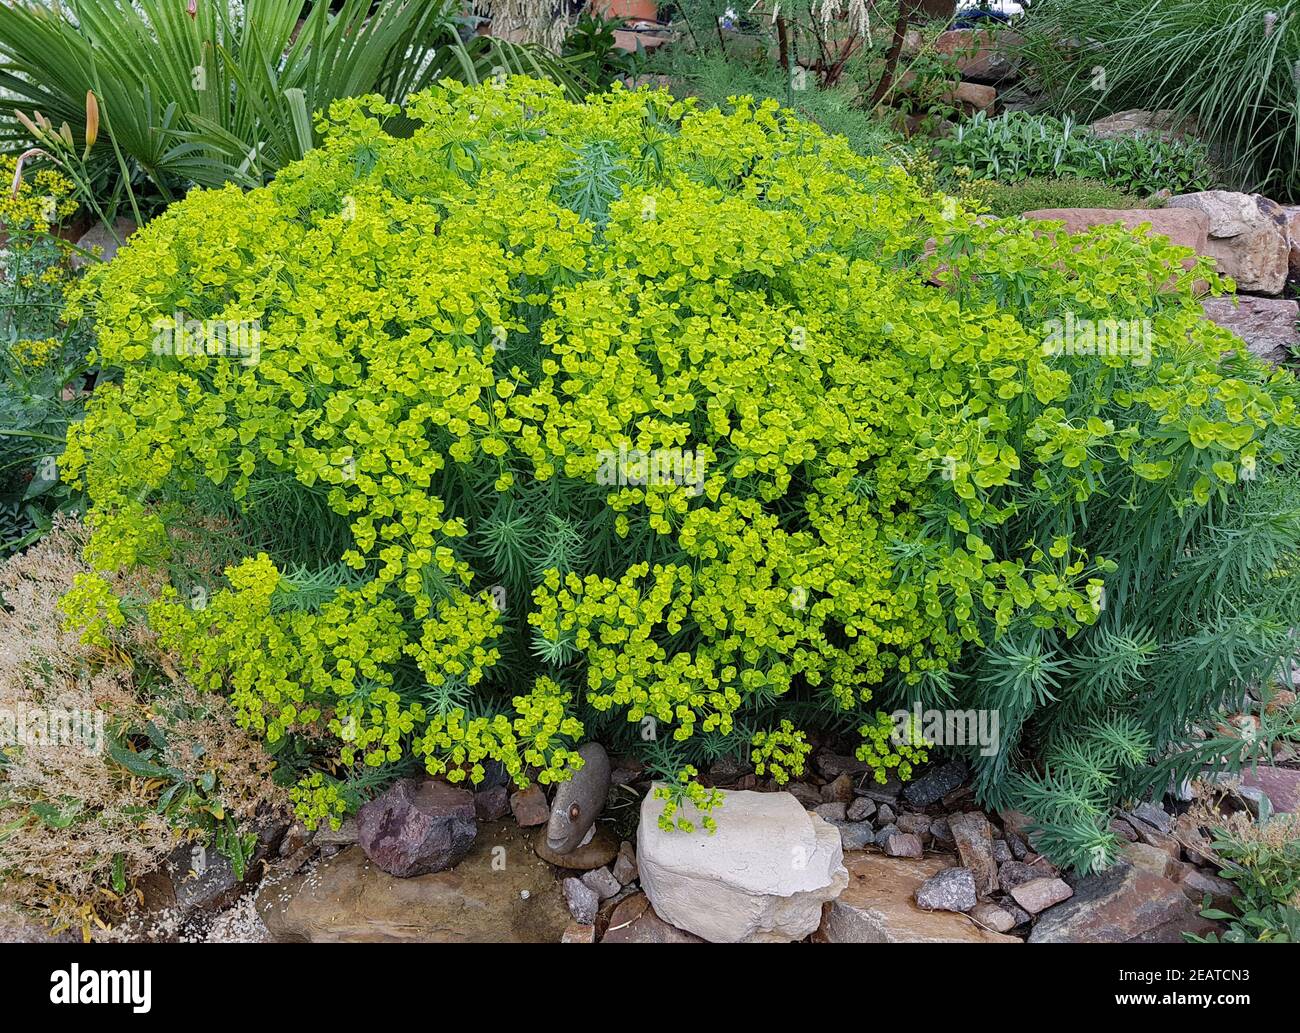 Garten Wolfsmilch High Resolution Stock Photography and Images - Alamy